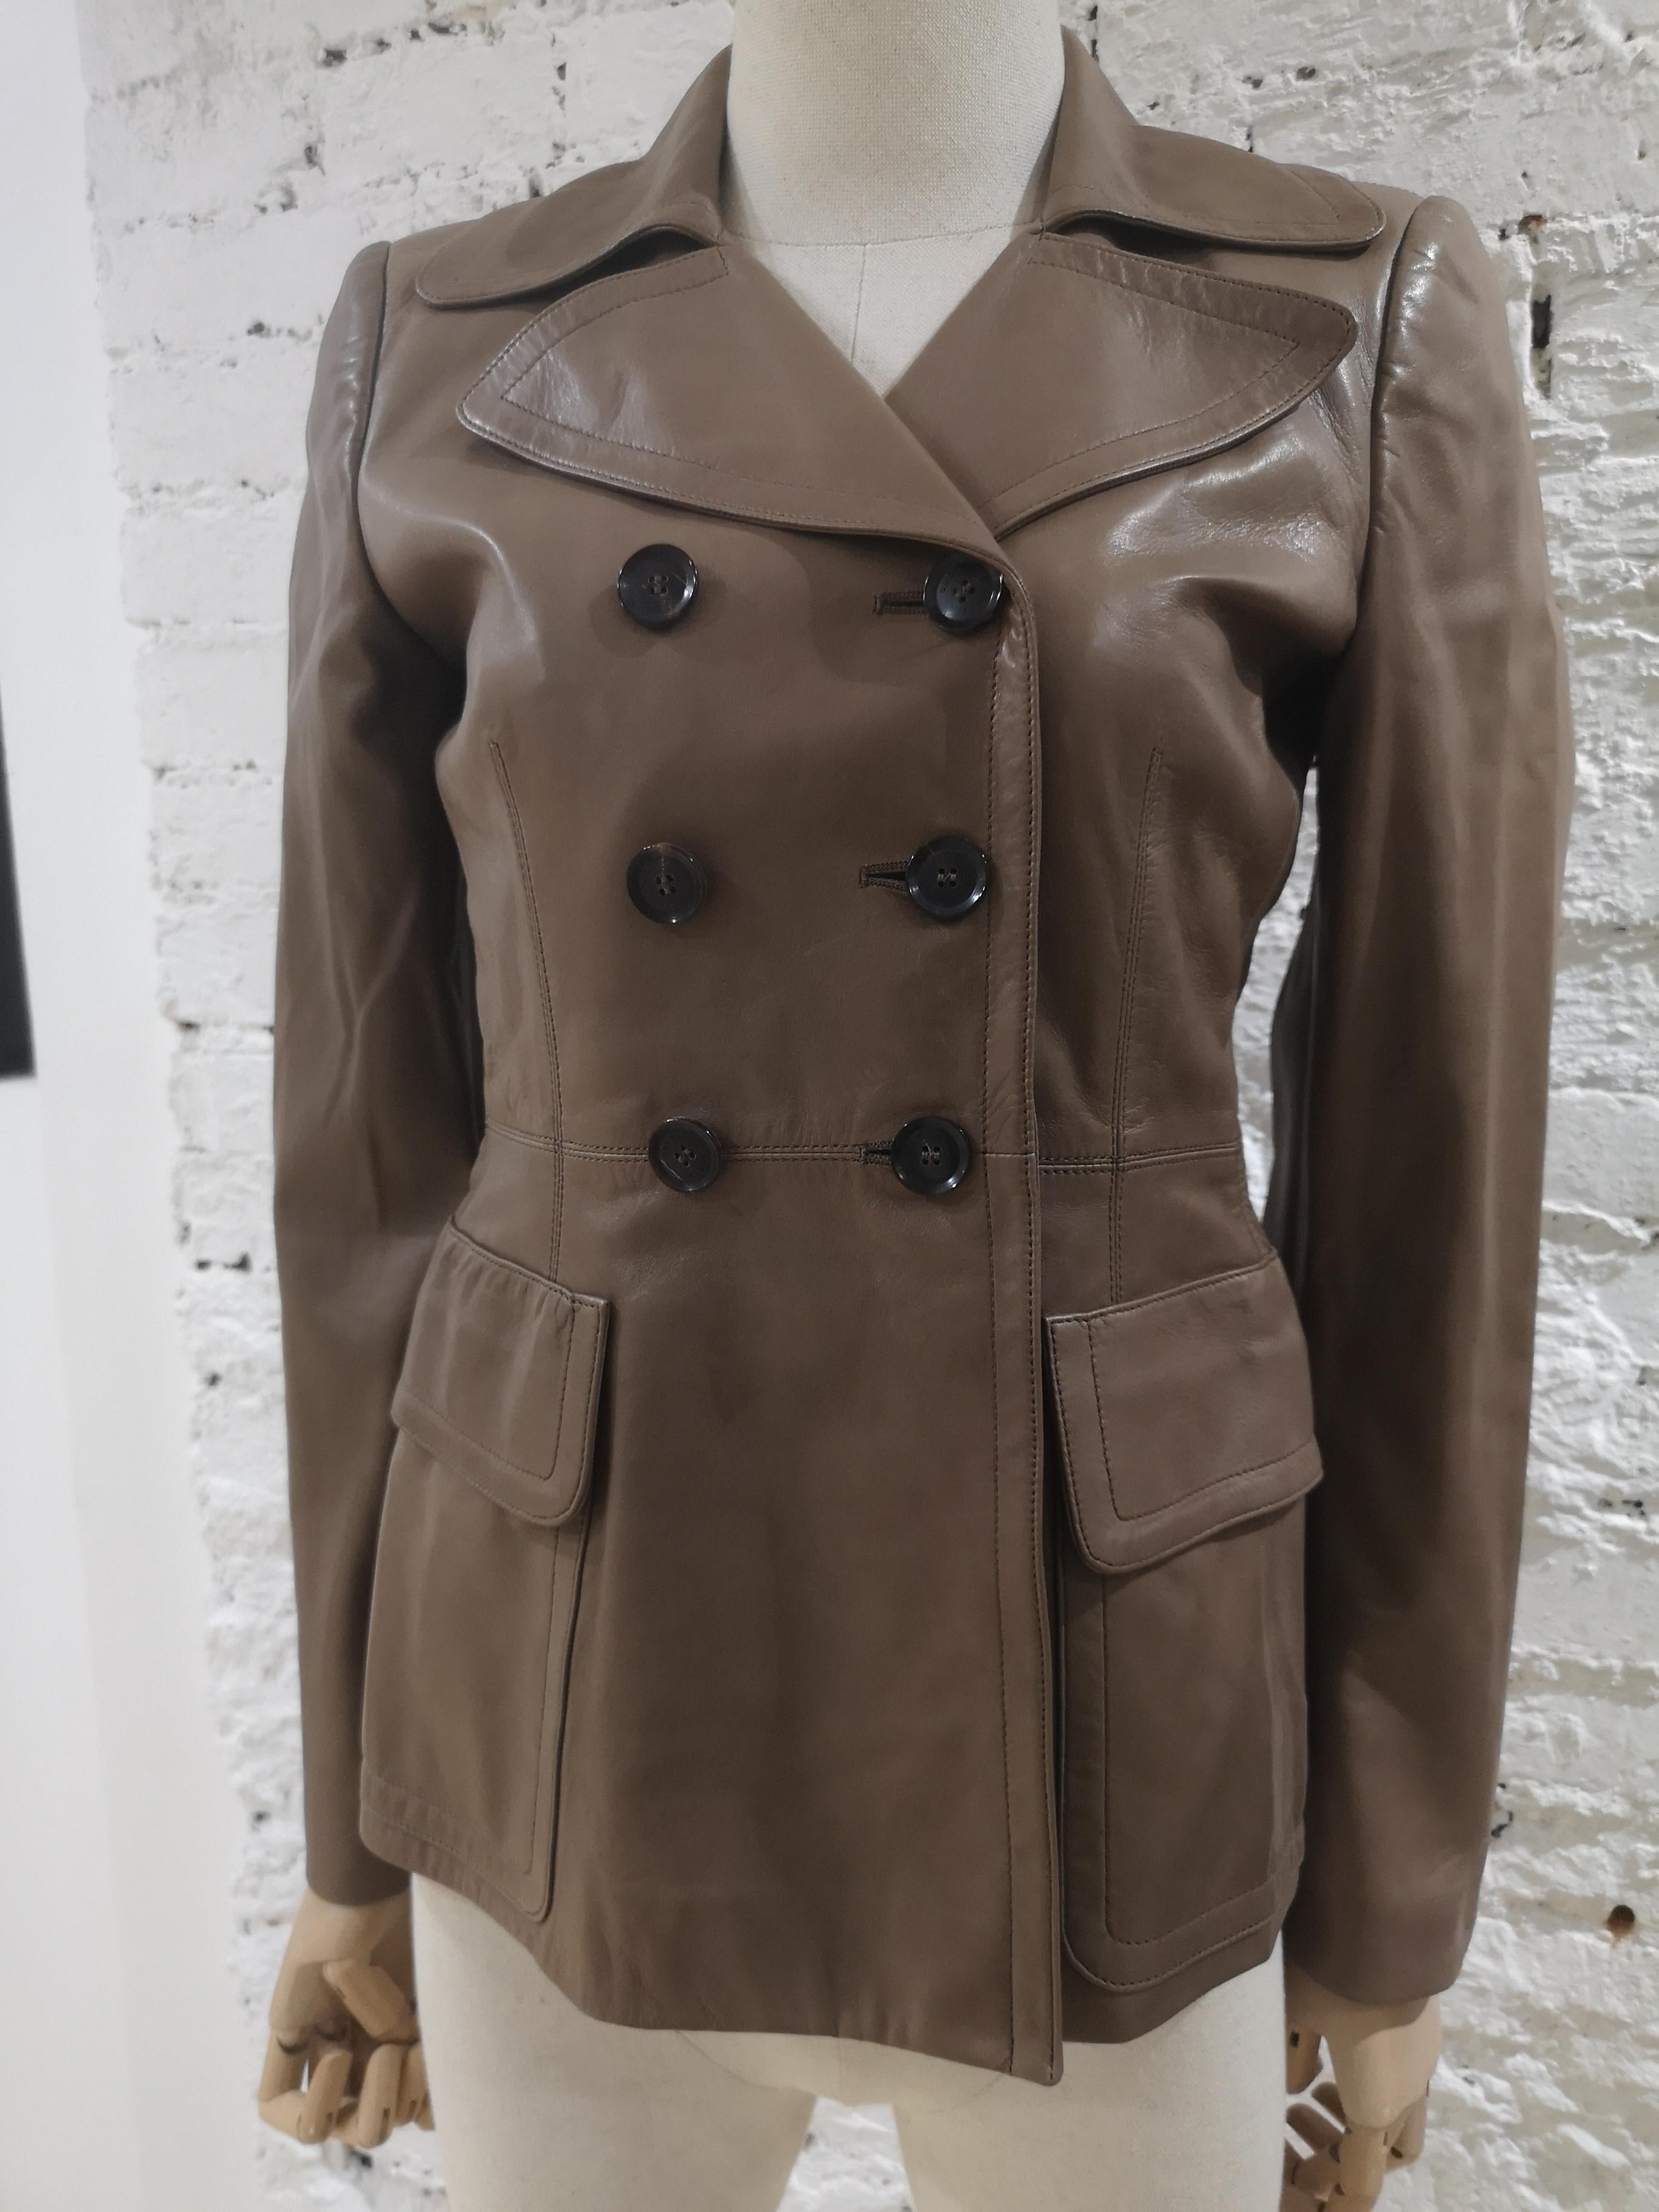 Gucci Leather jacket In Excellent Condition For Sale In Capri, IT